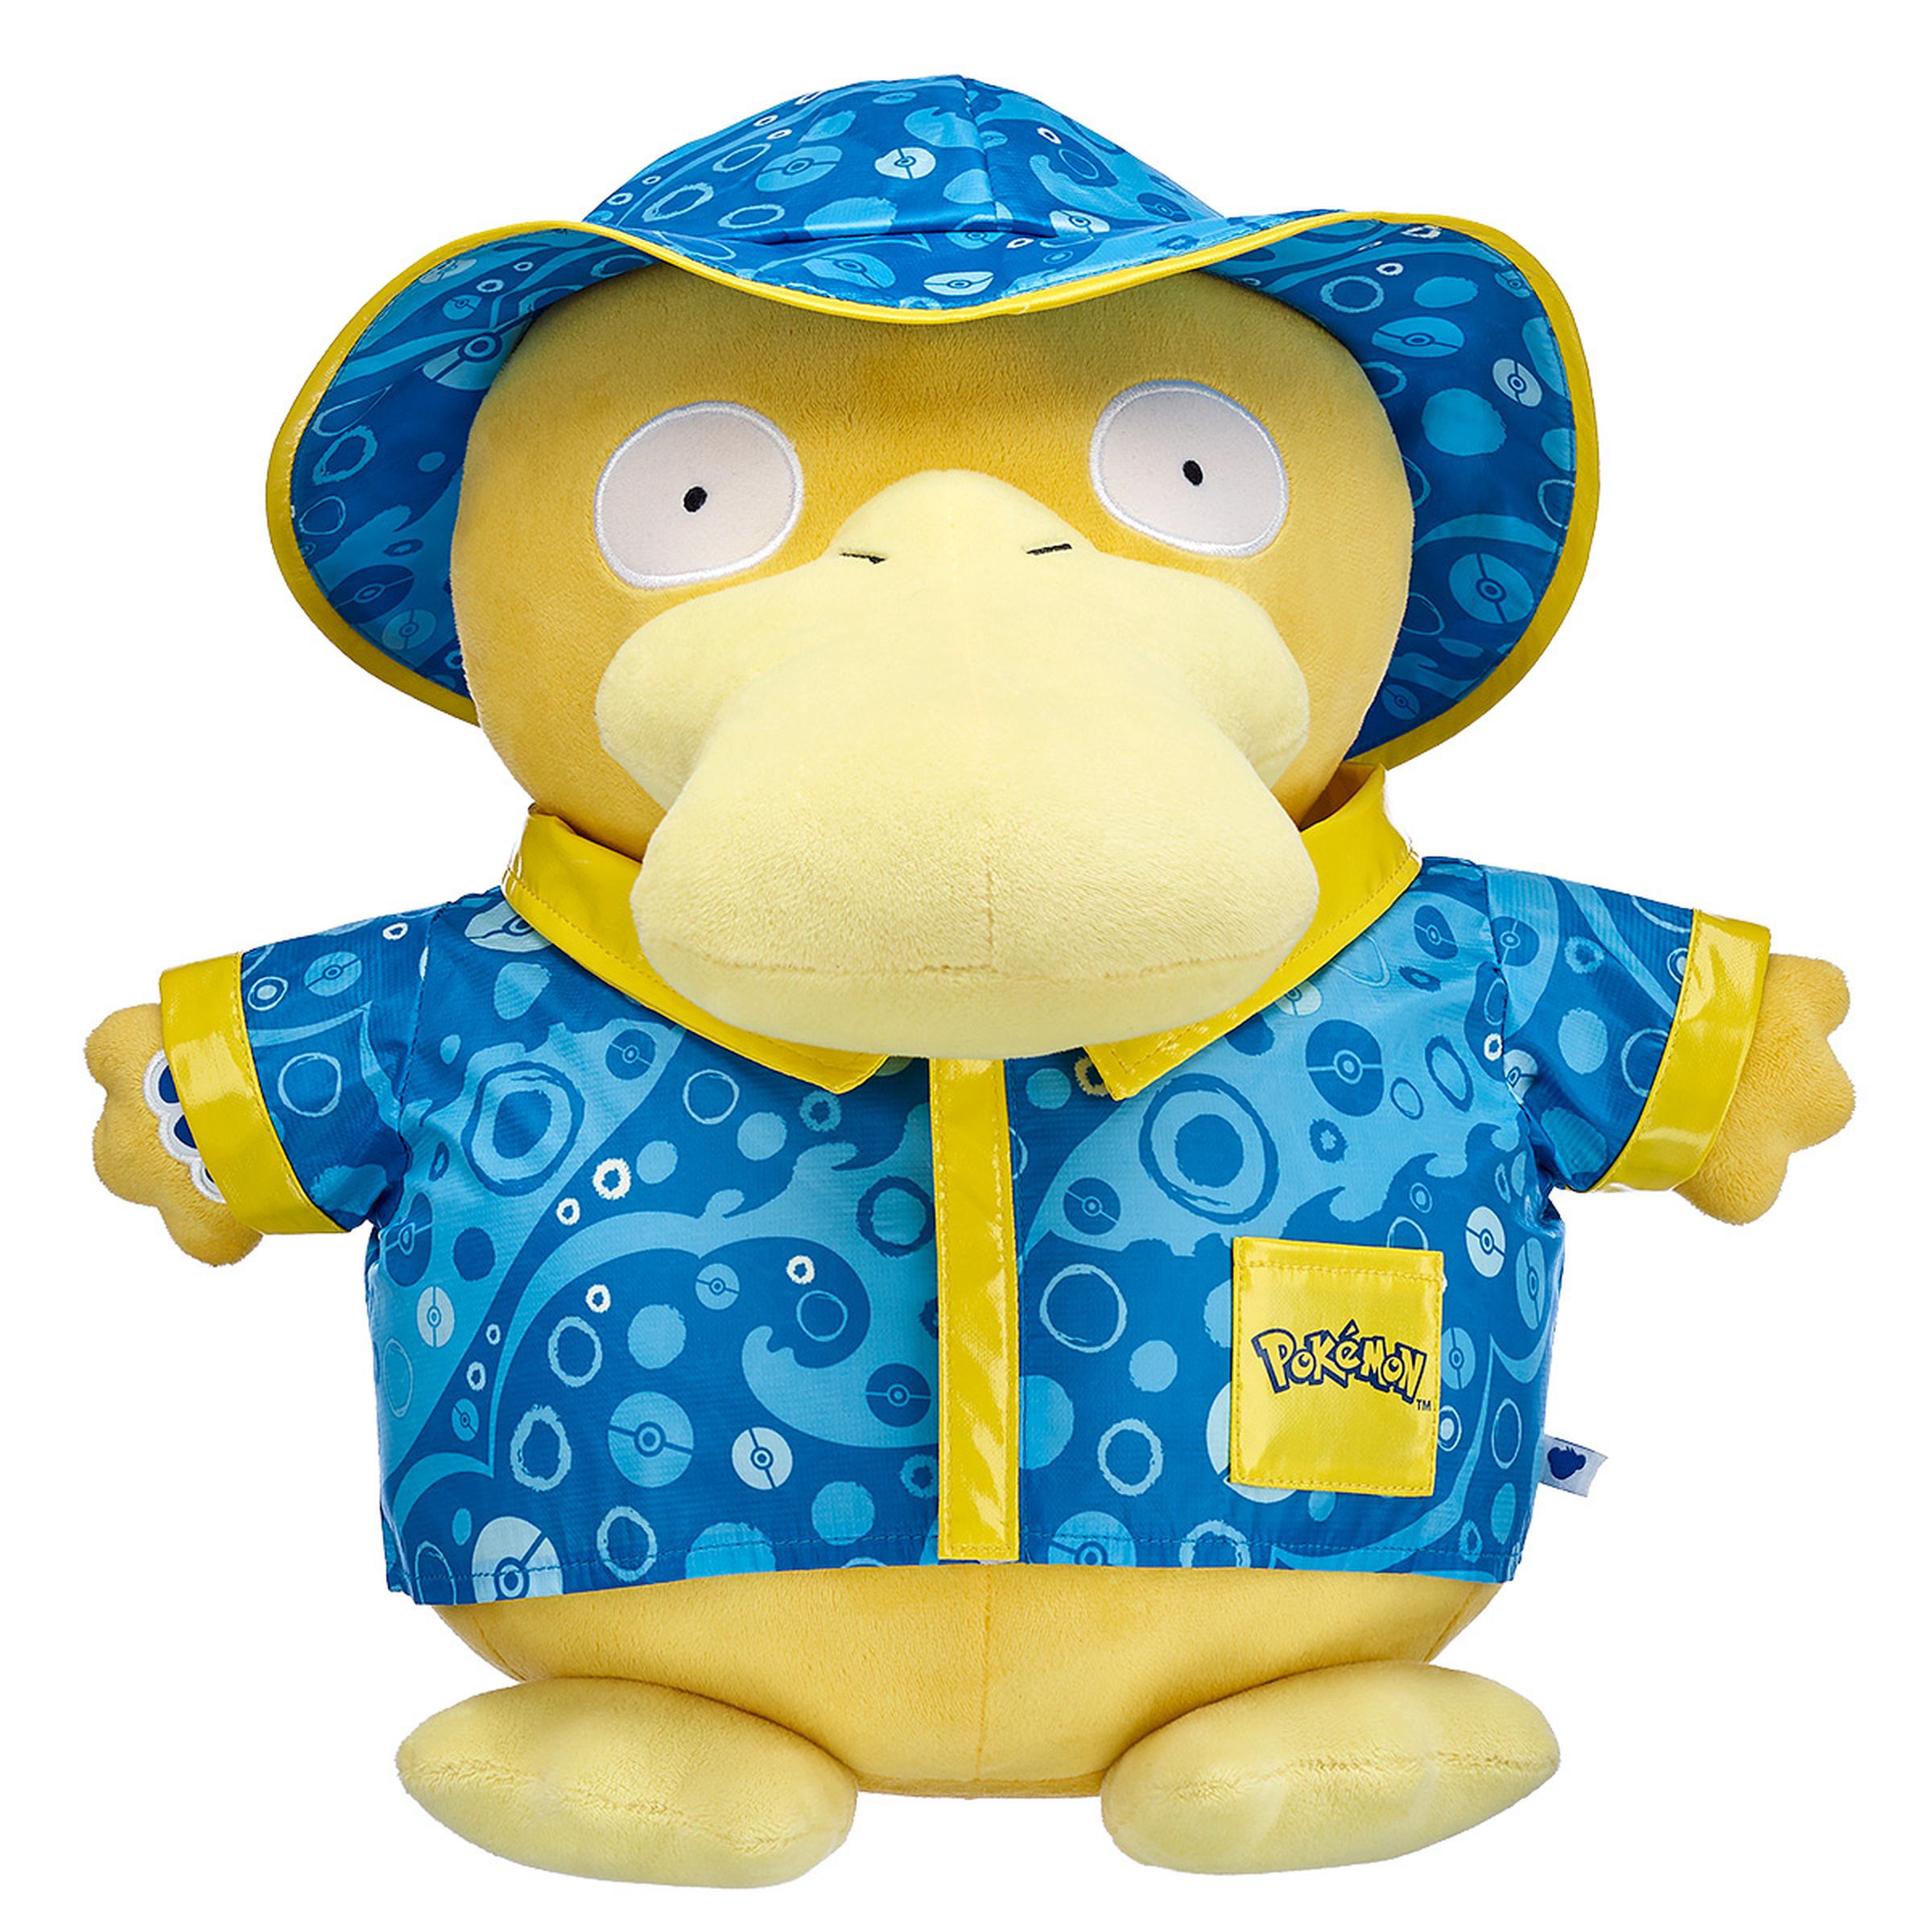 Psyduck in a raincoat!